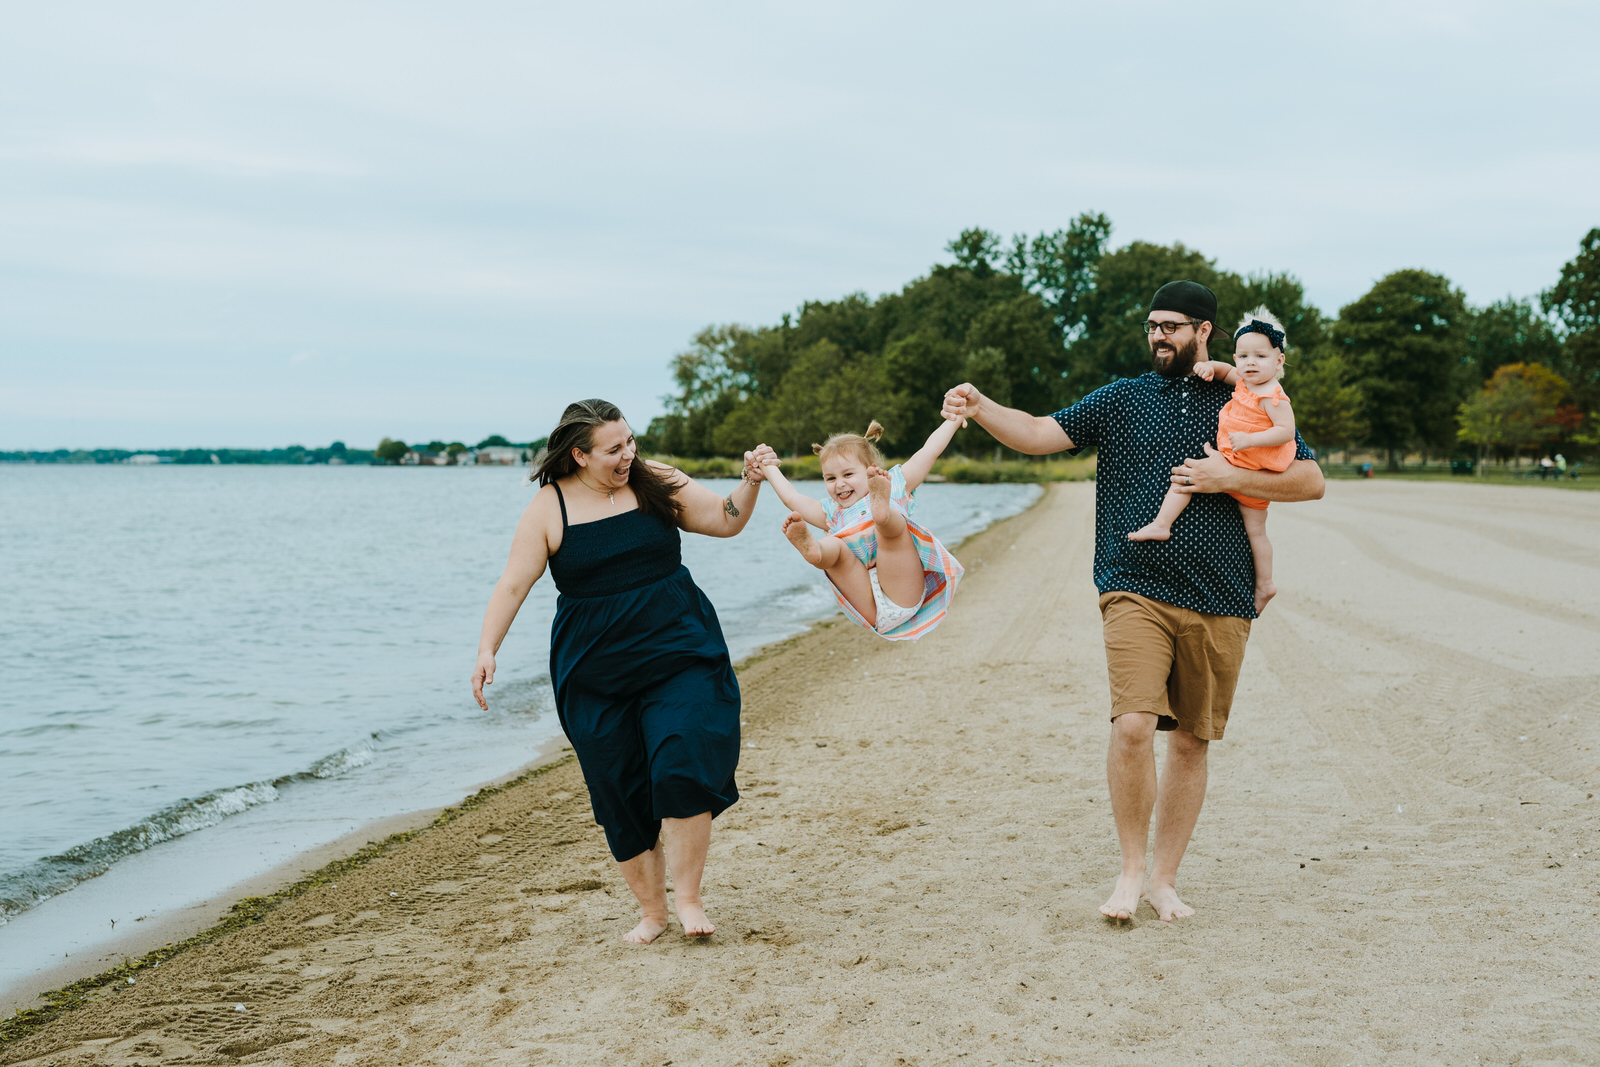 Lake St. Clair Family Session